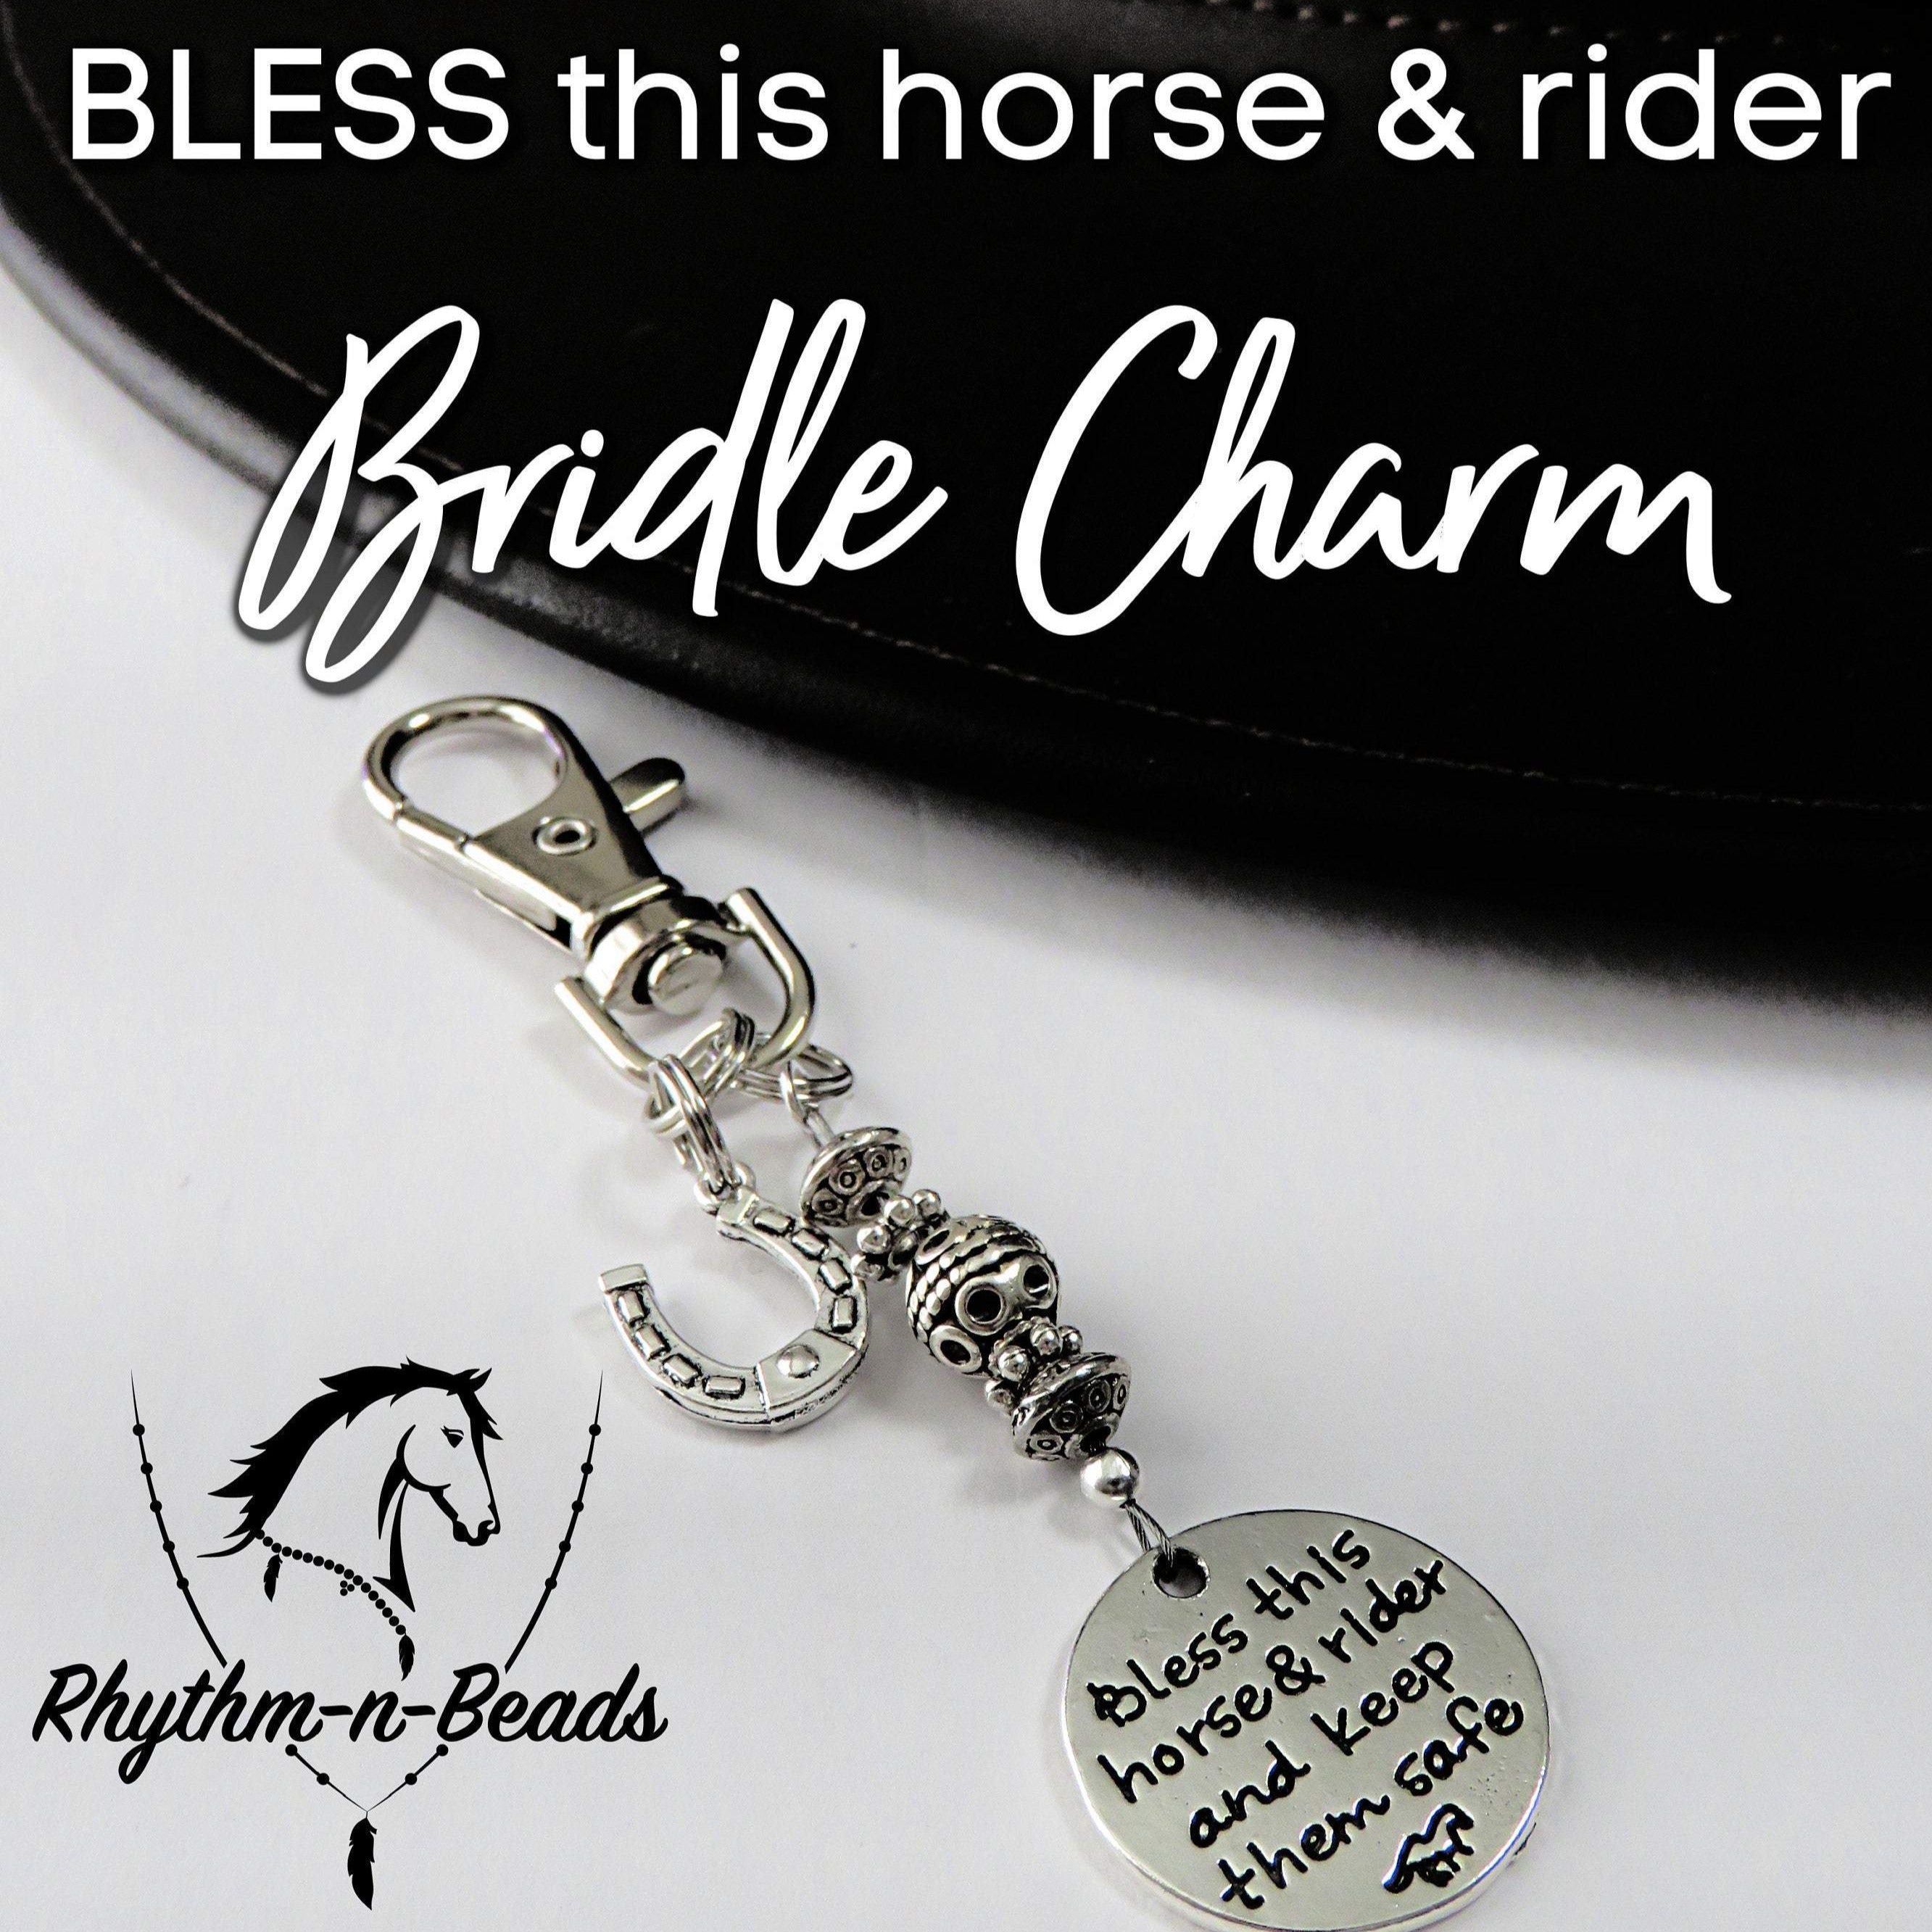 BRIDLE CHARM Bless this Horse and Rider – Rhythm-n-Beads